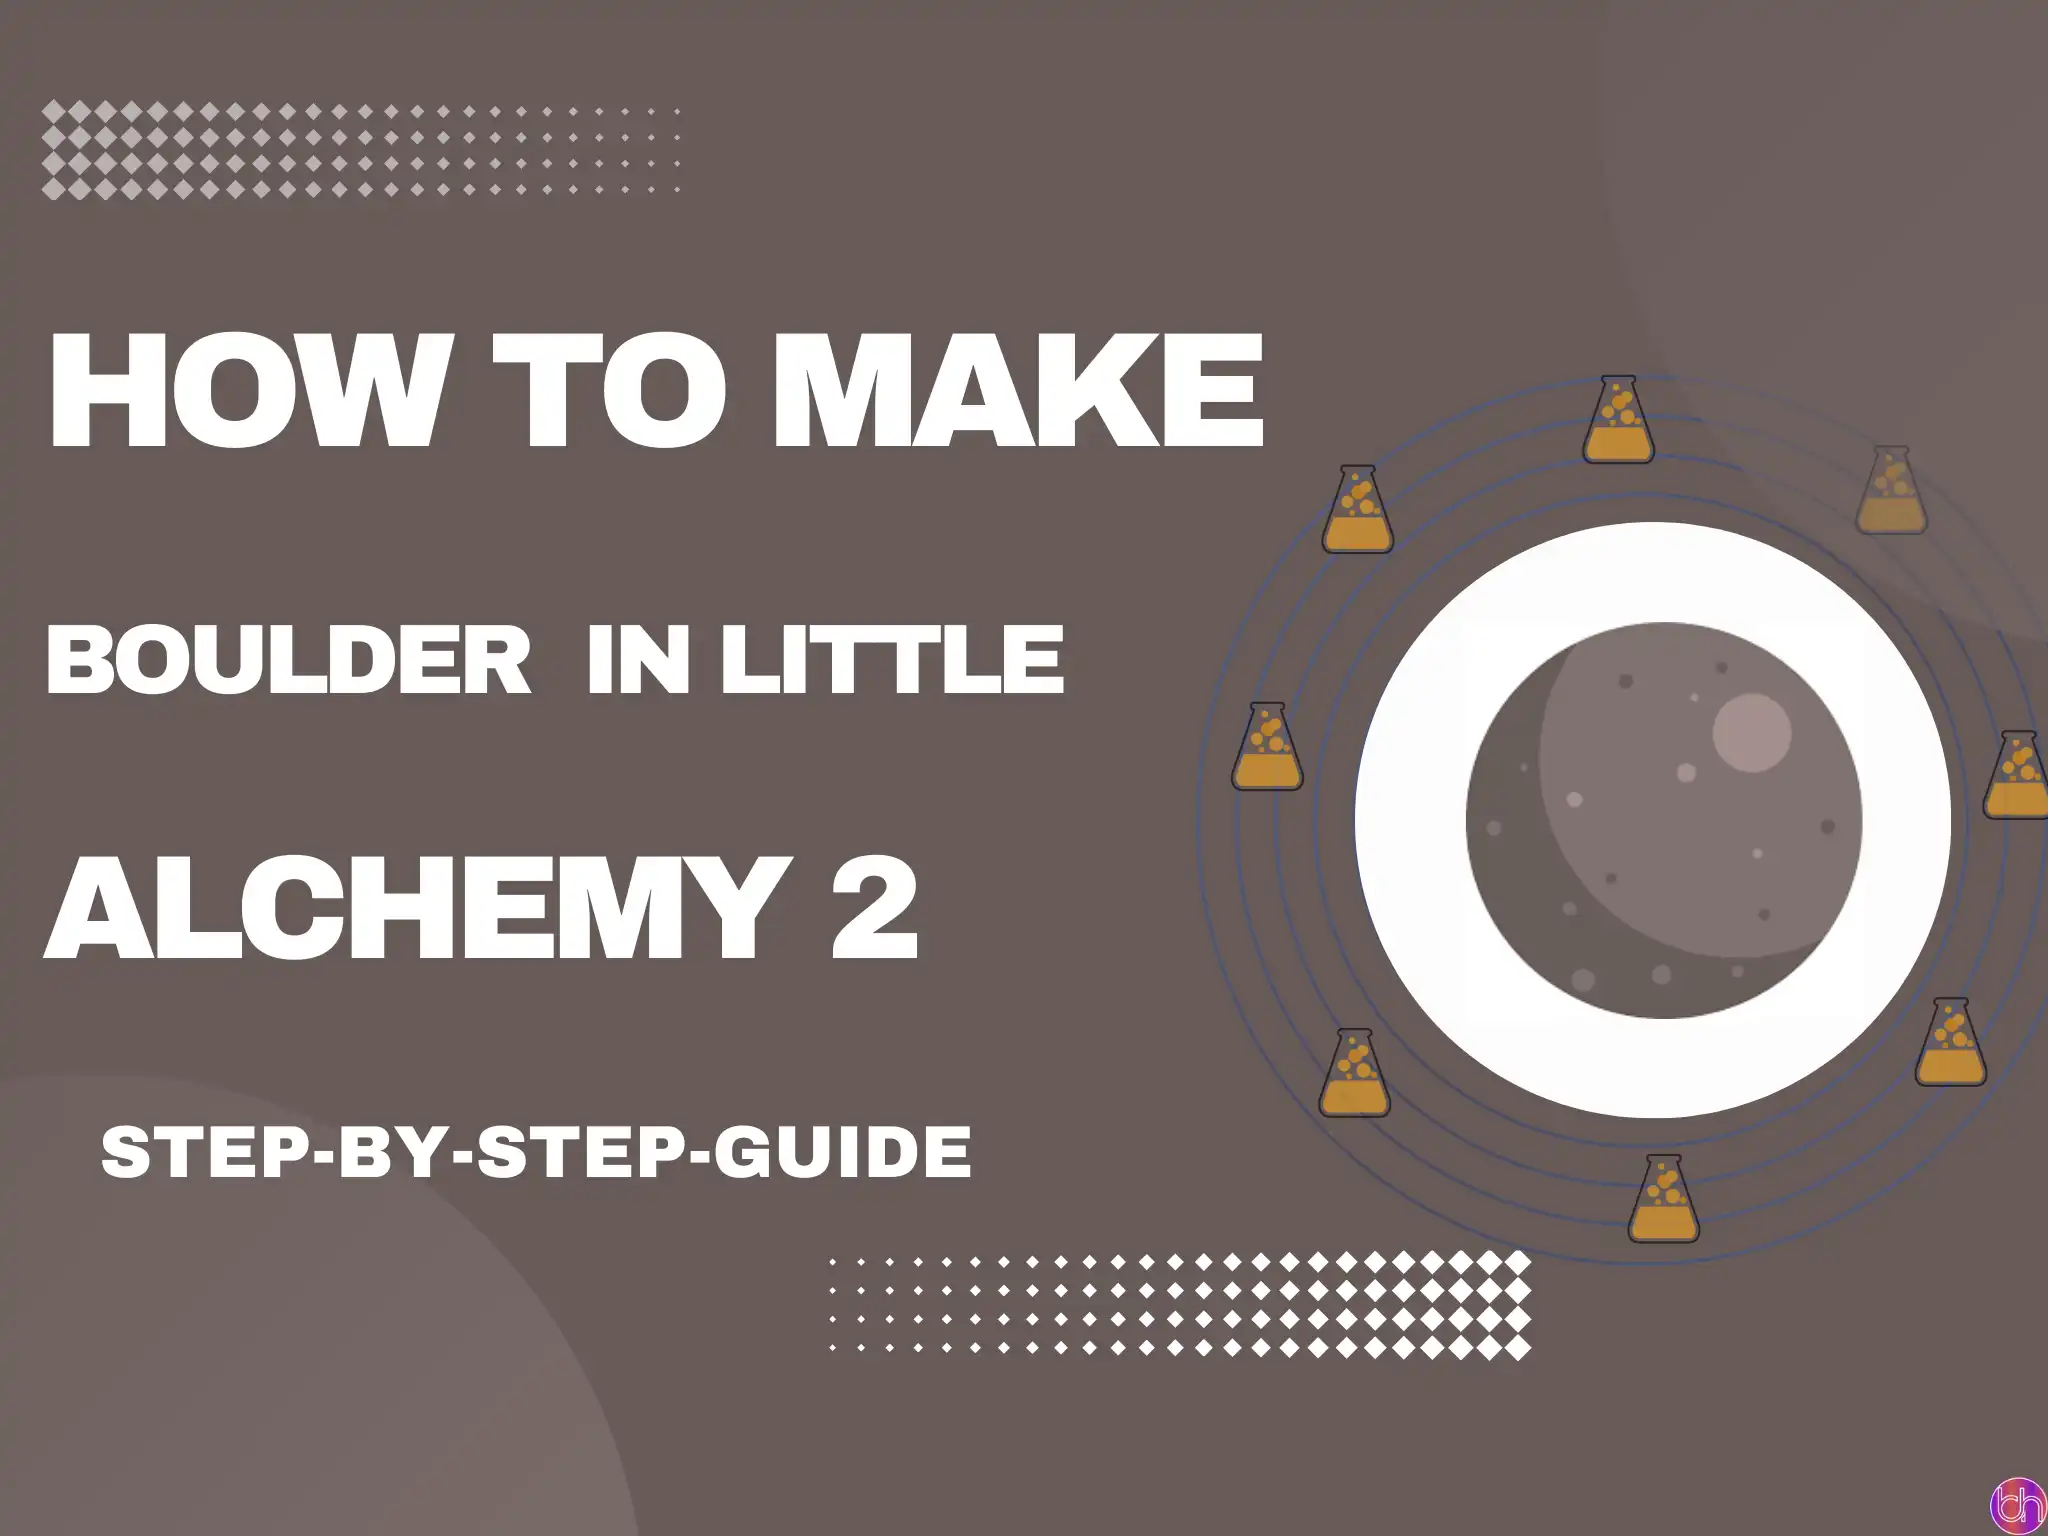 How to make Boulder in Little Alchemy 2